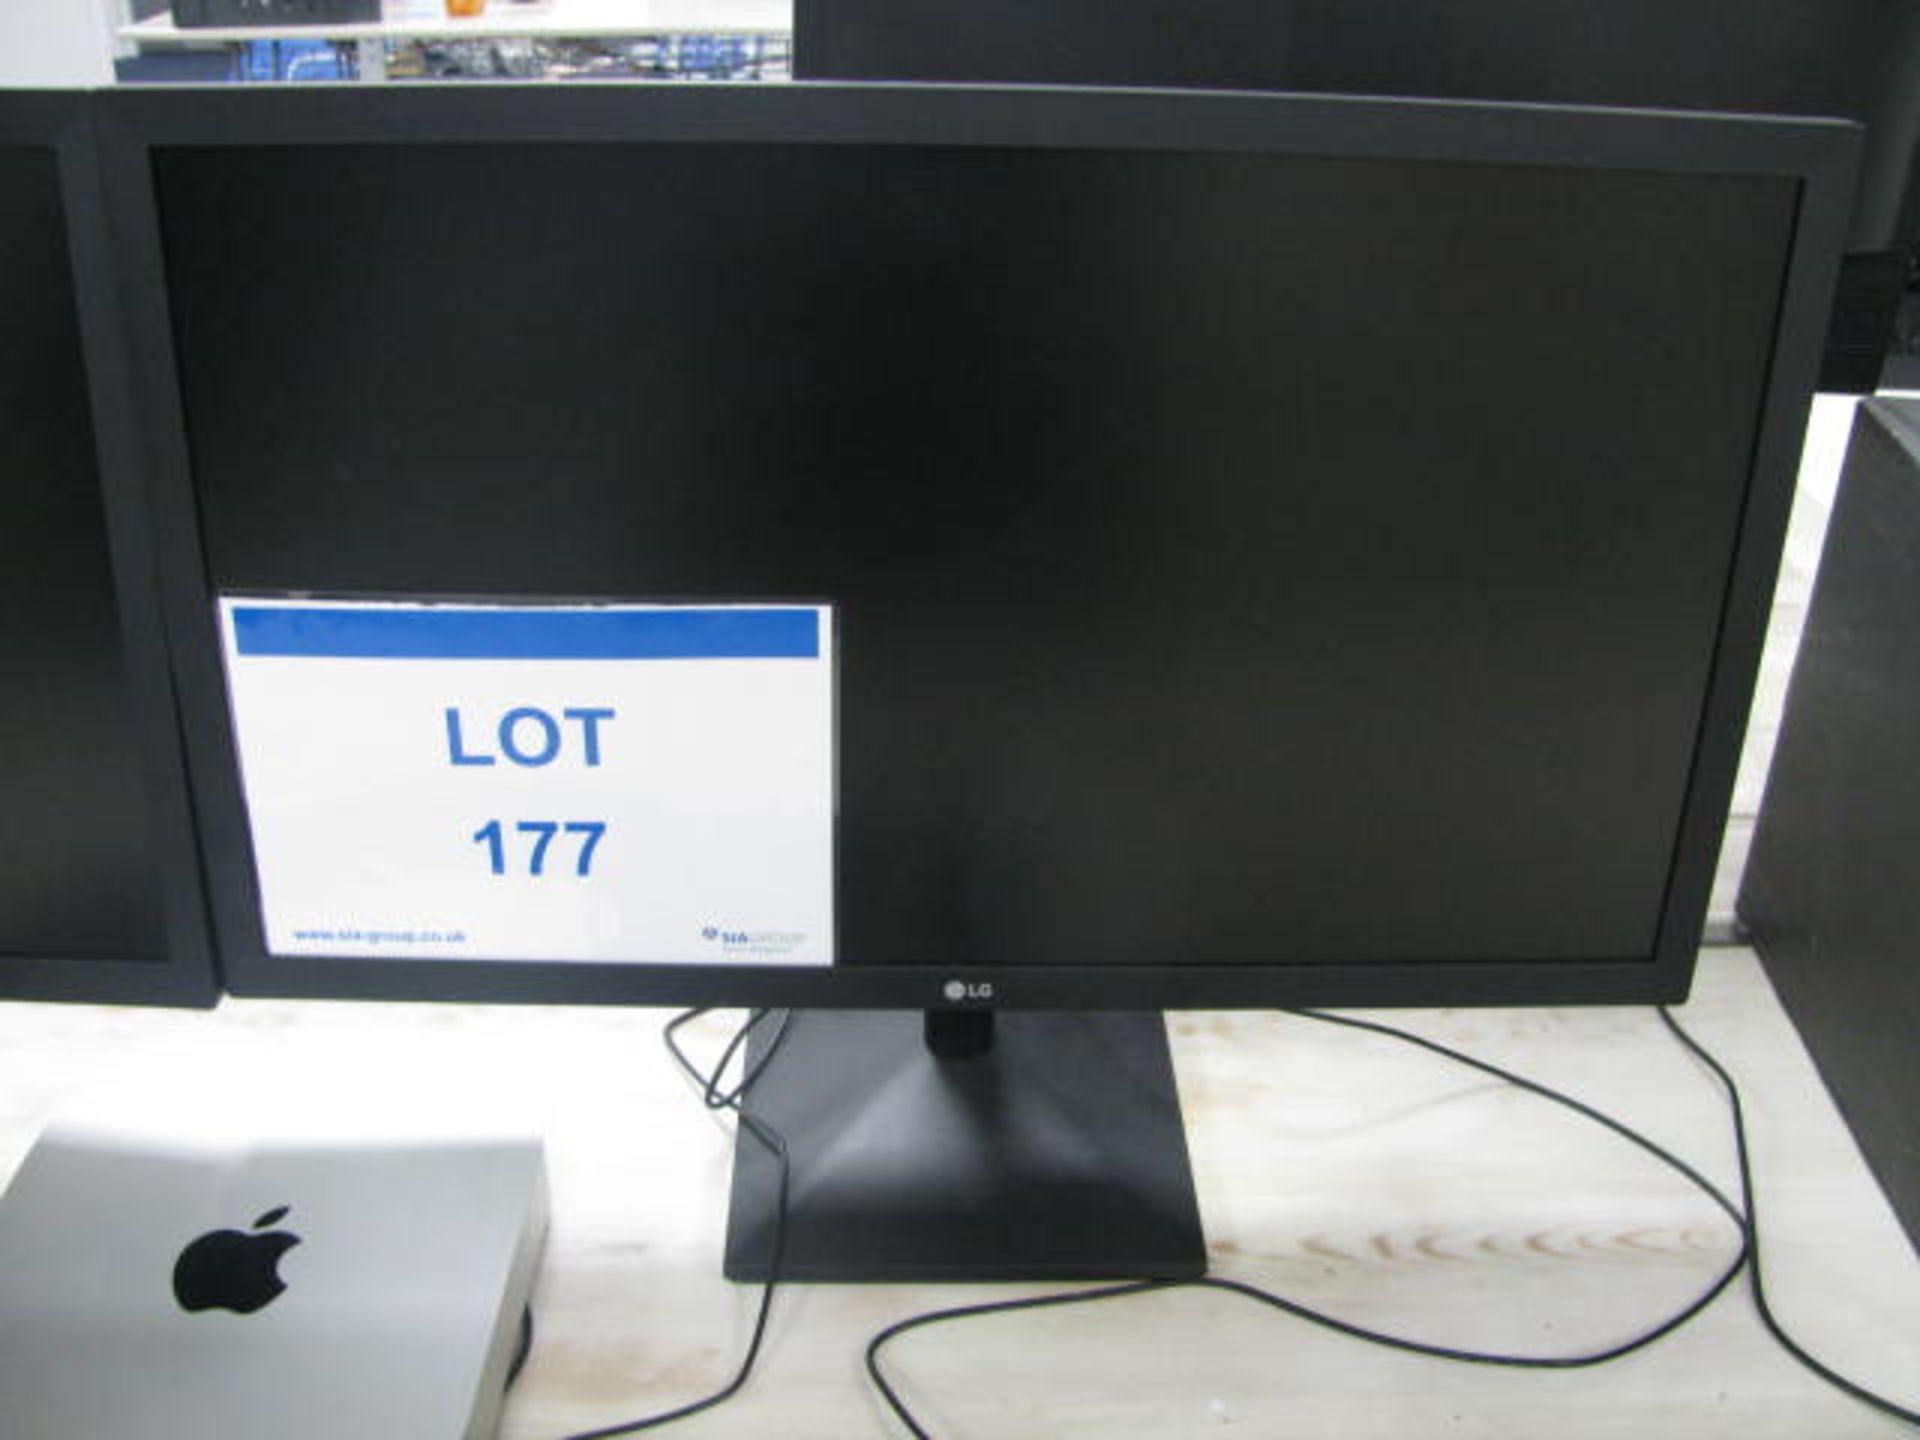 Apple Mac mini base unit with (2) LG flat screens, keyboard and mouse - Image 2 of 4